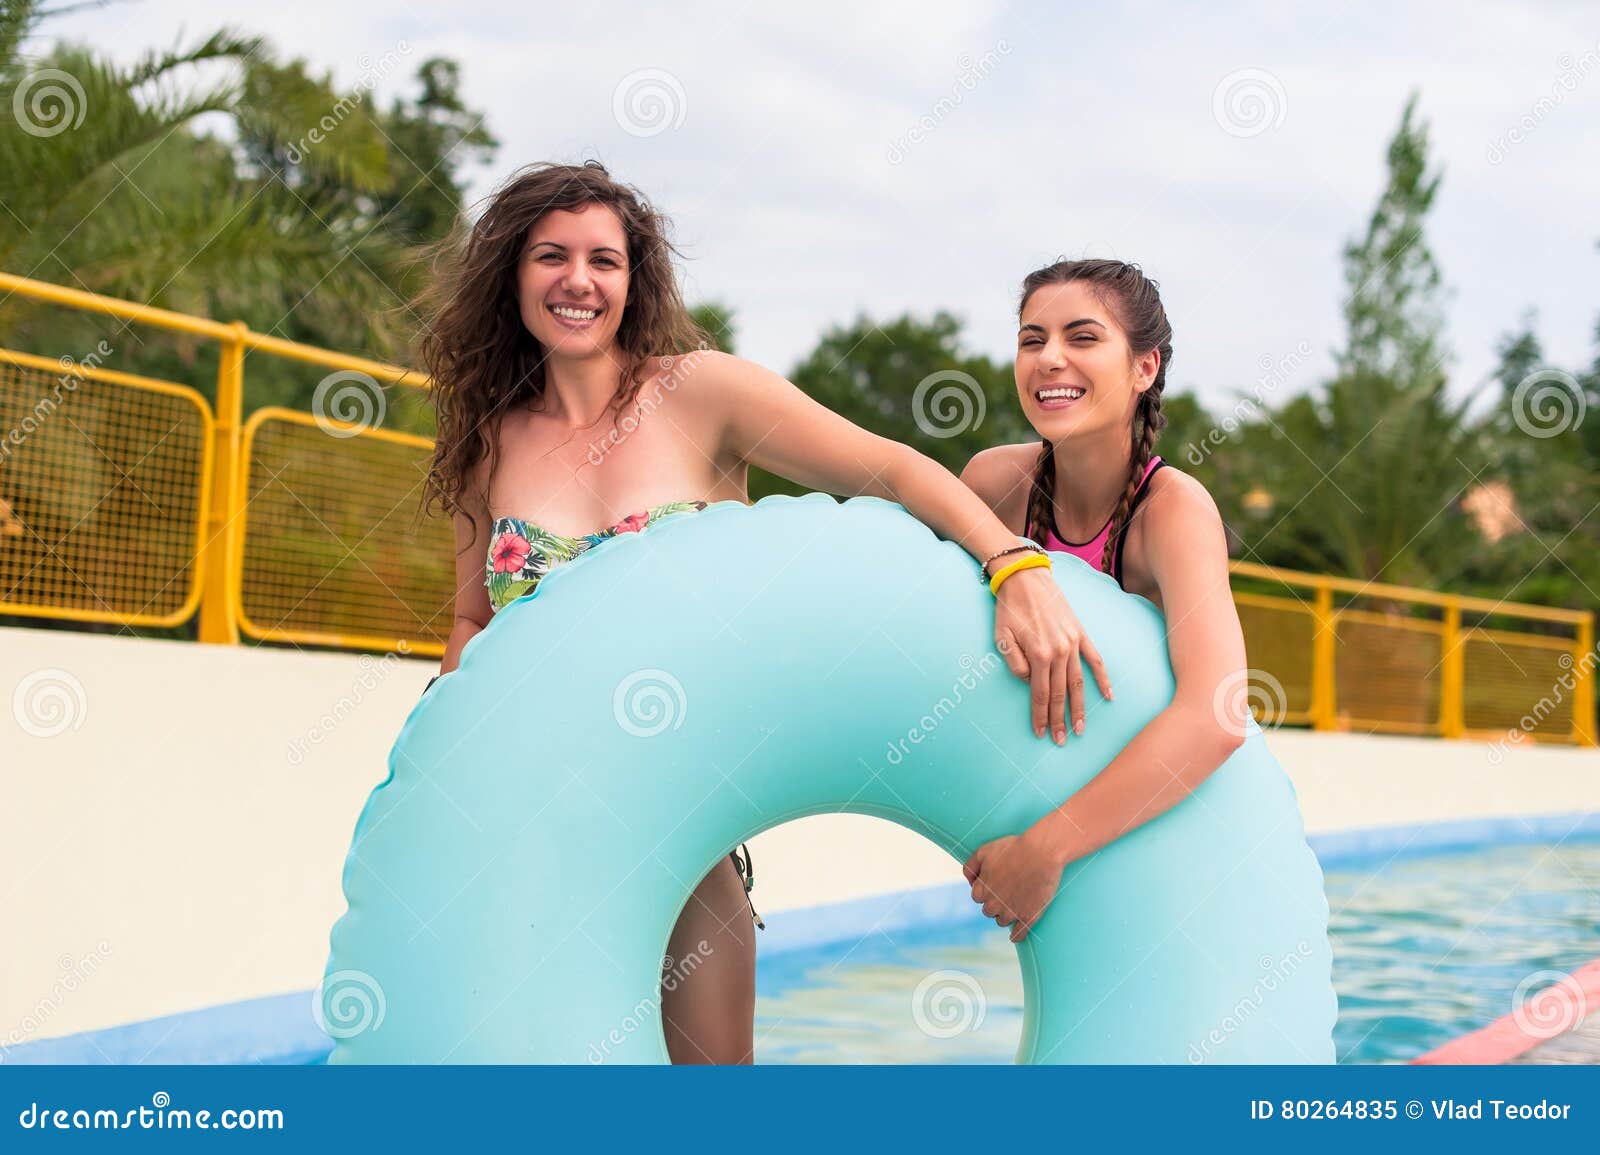 Hot young girls at water park